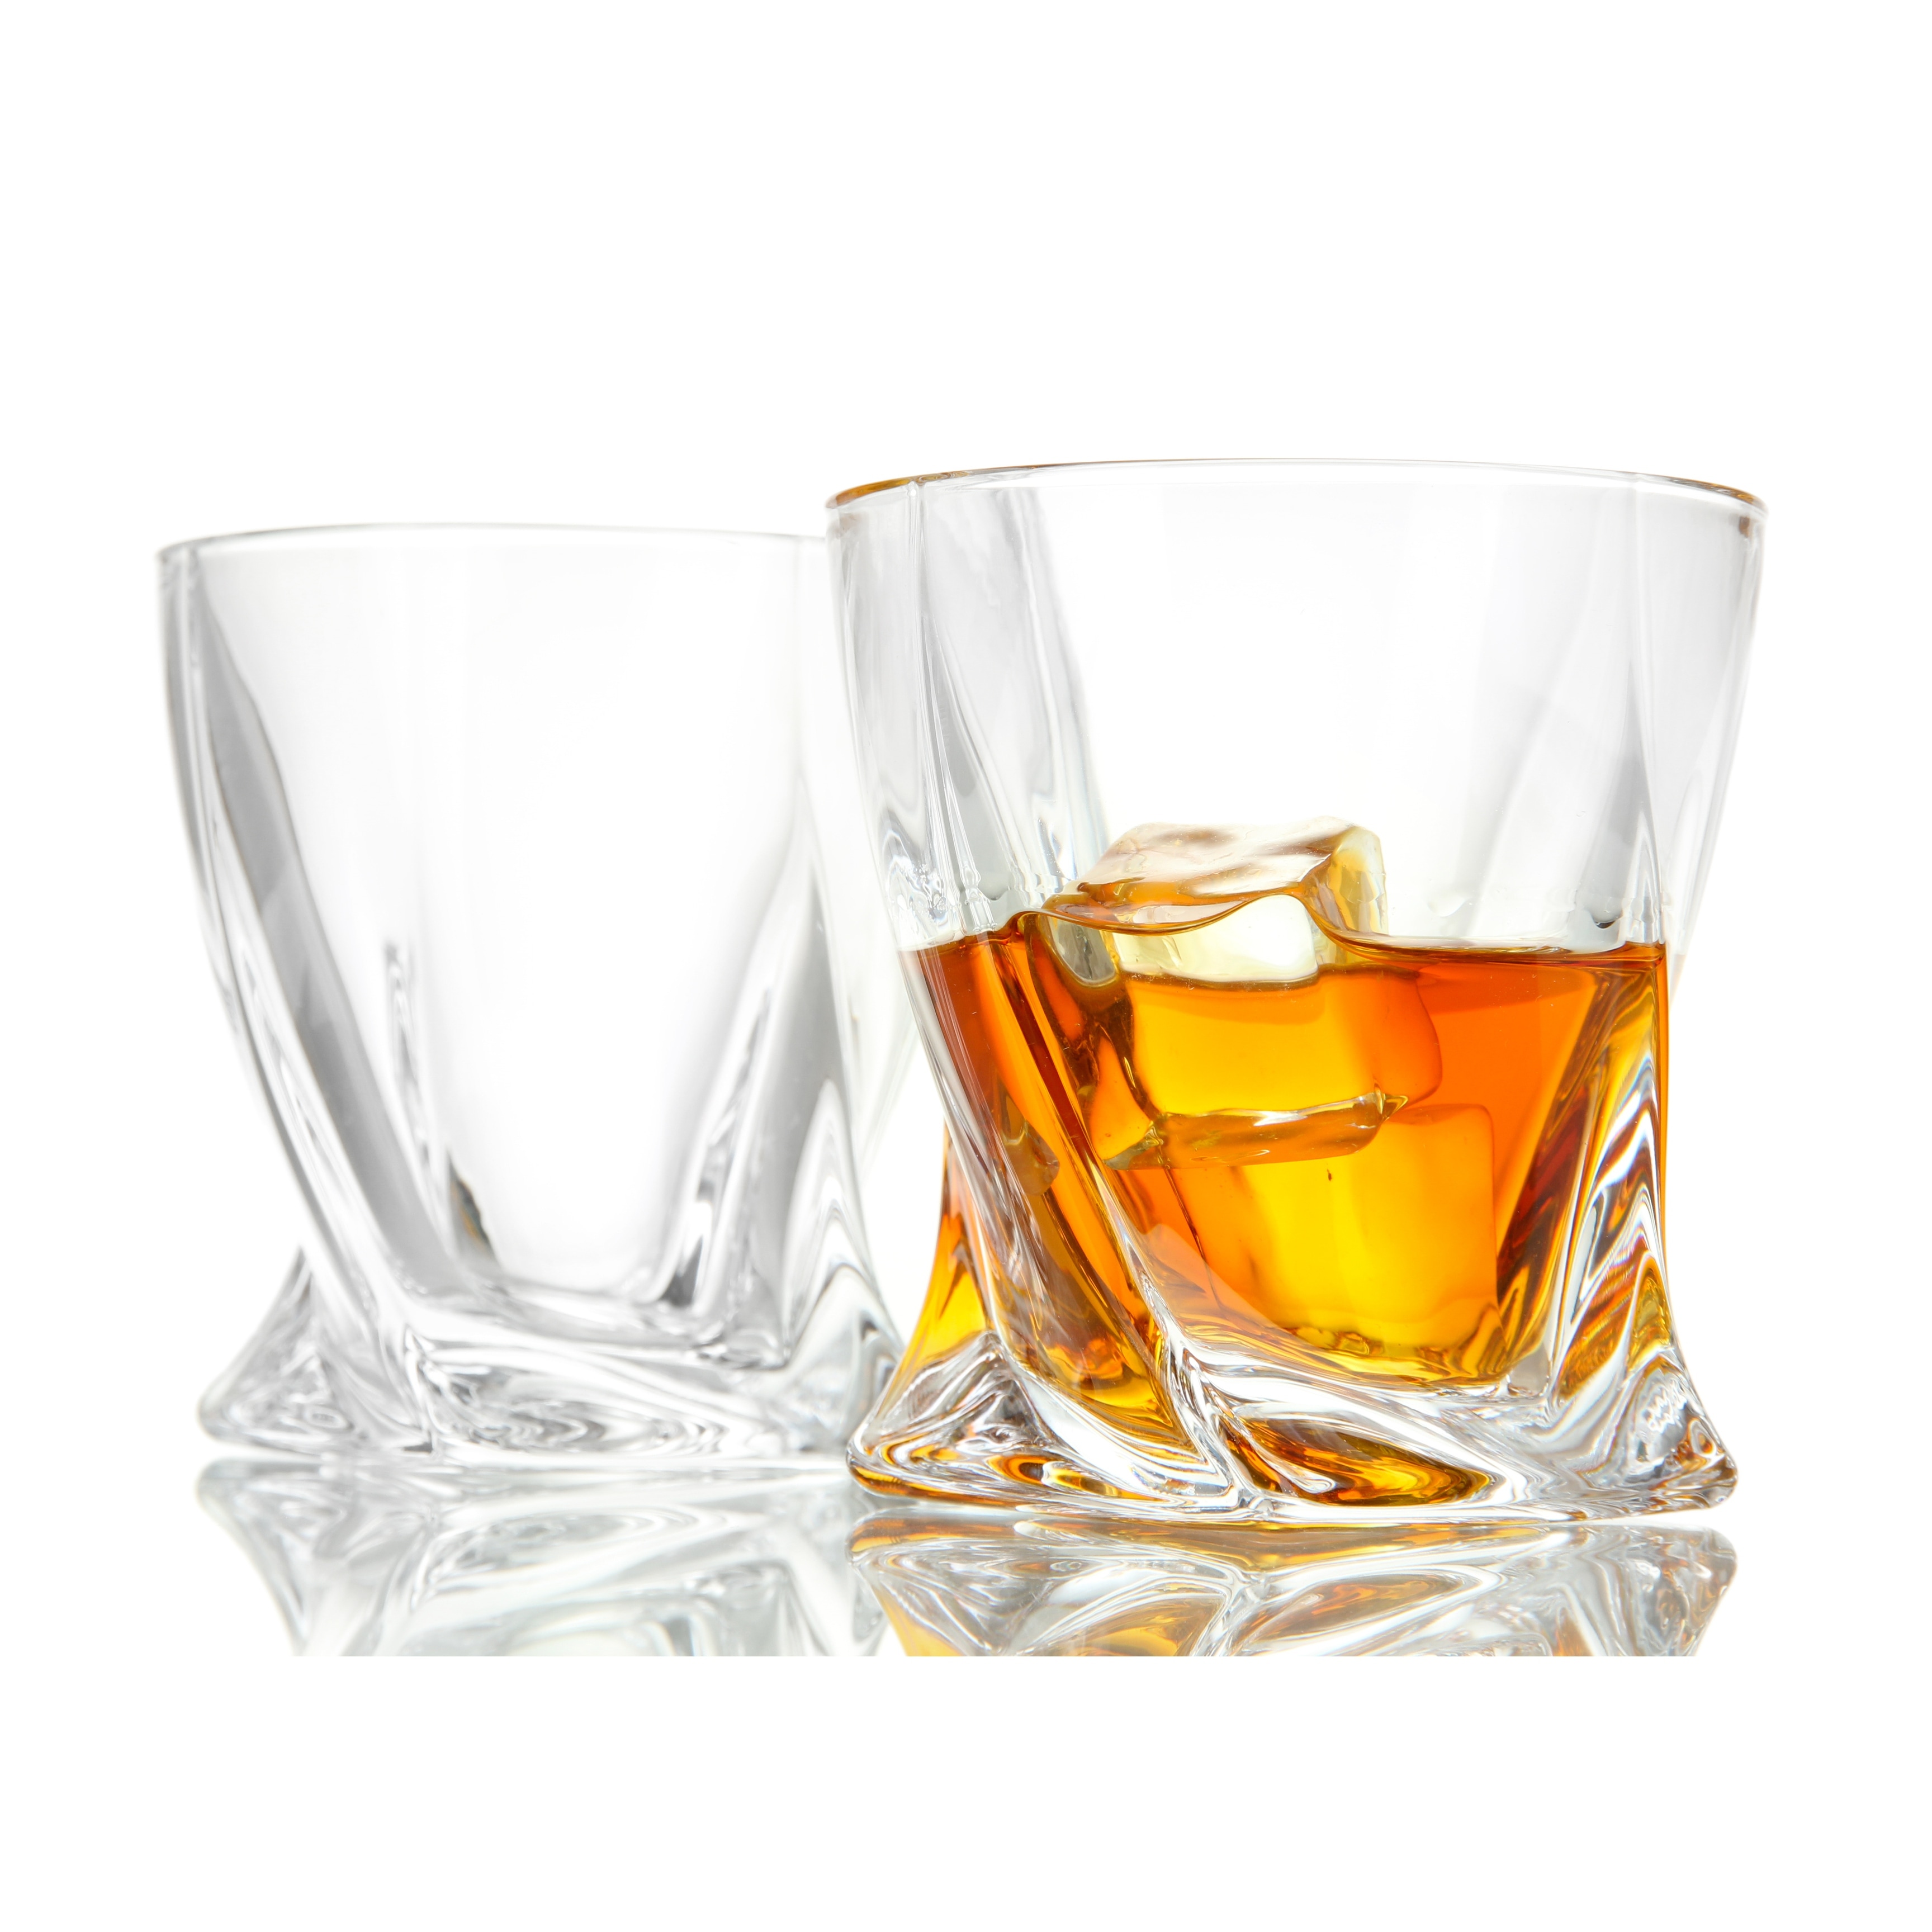 https://ak1.ostkcdn.com/images/products/is/images/direct/01afb52c780ce615265f918f57651f3e44aae594/Bezrat-Whiskey-Glass-Gift-Set.jpg